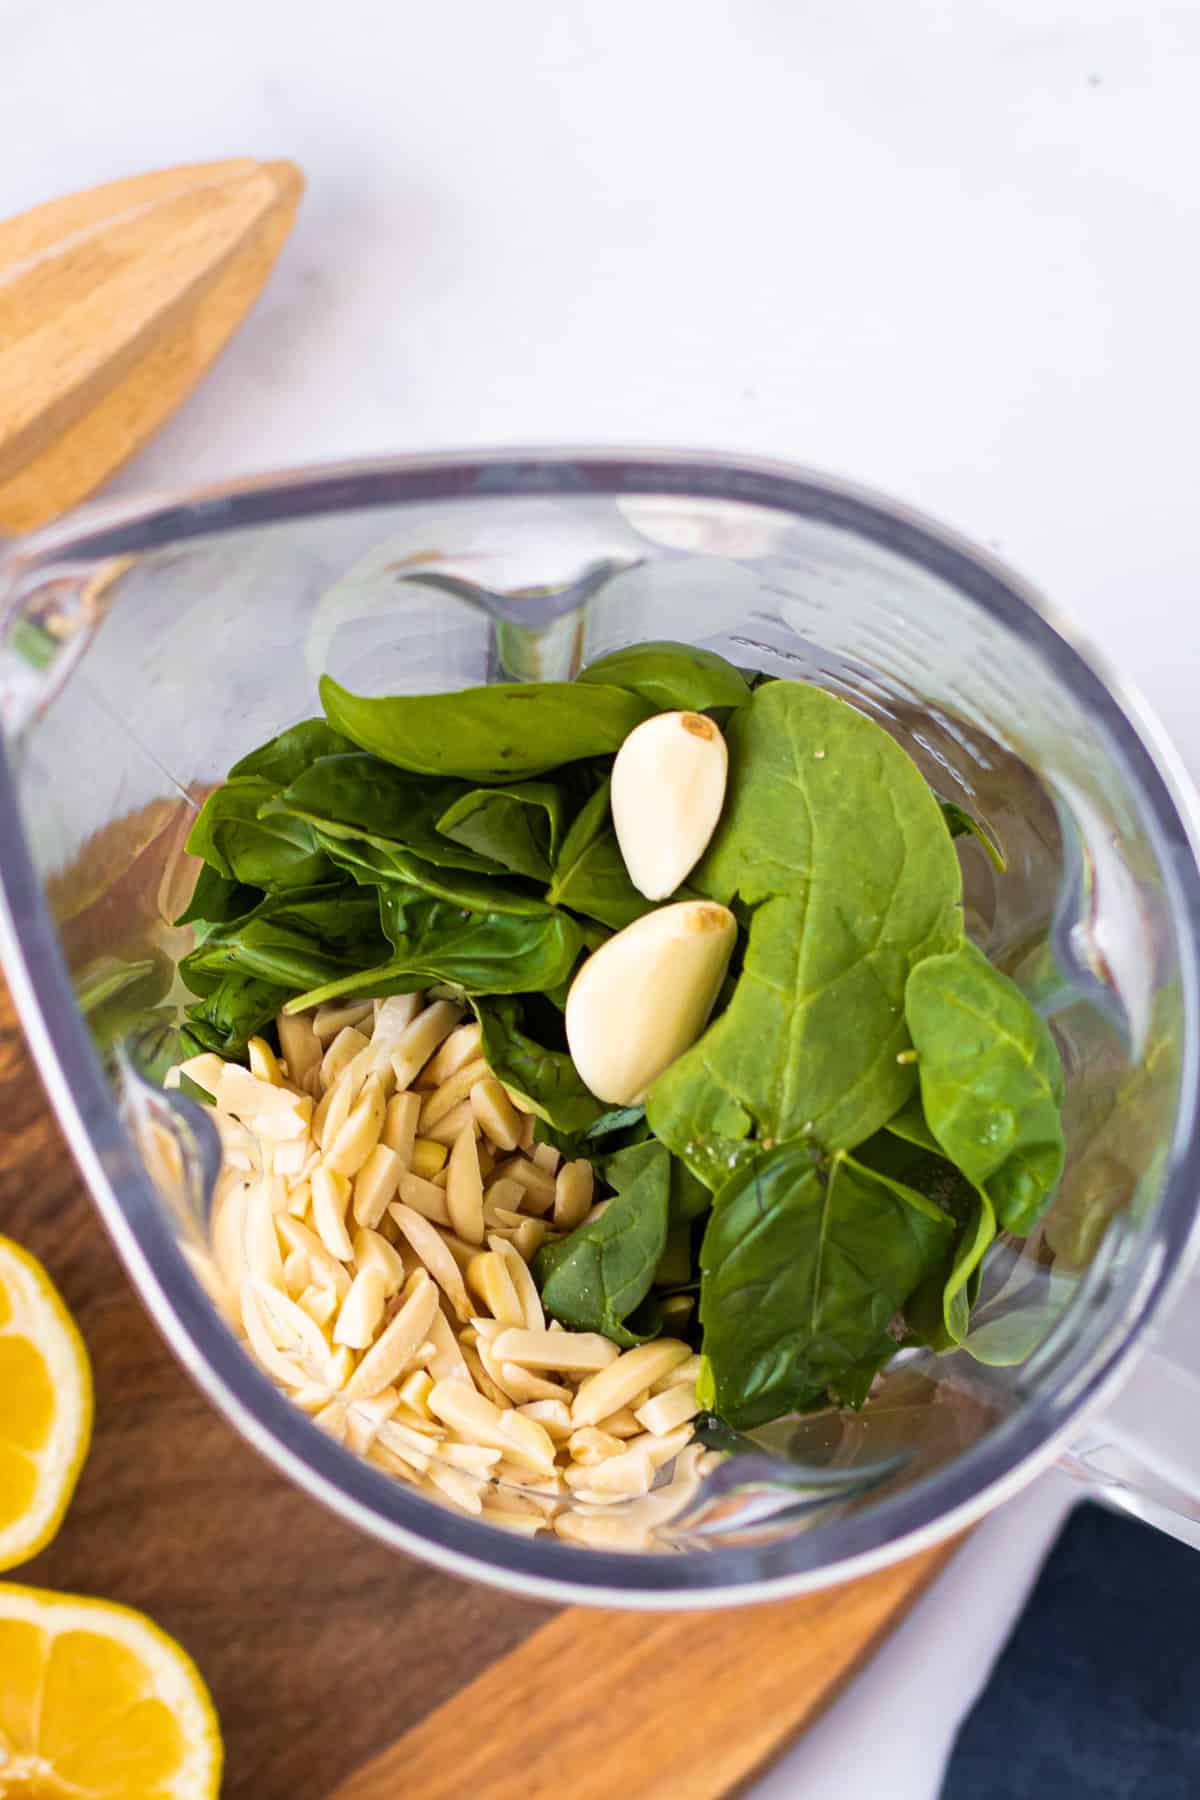 Ingredients for spinach basil pesto in a food processor.